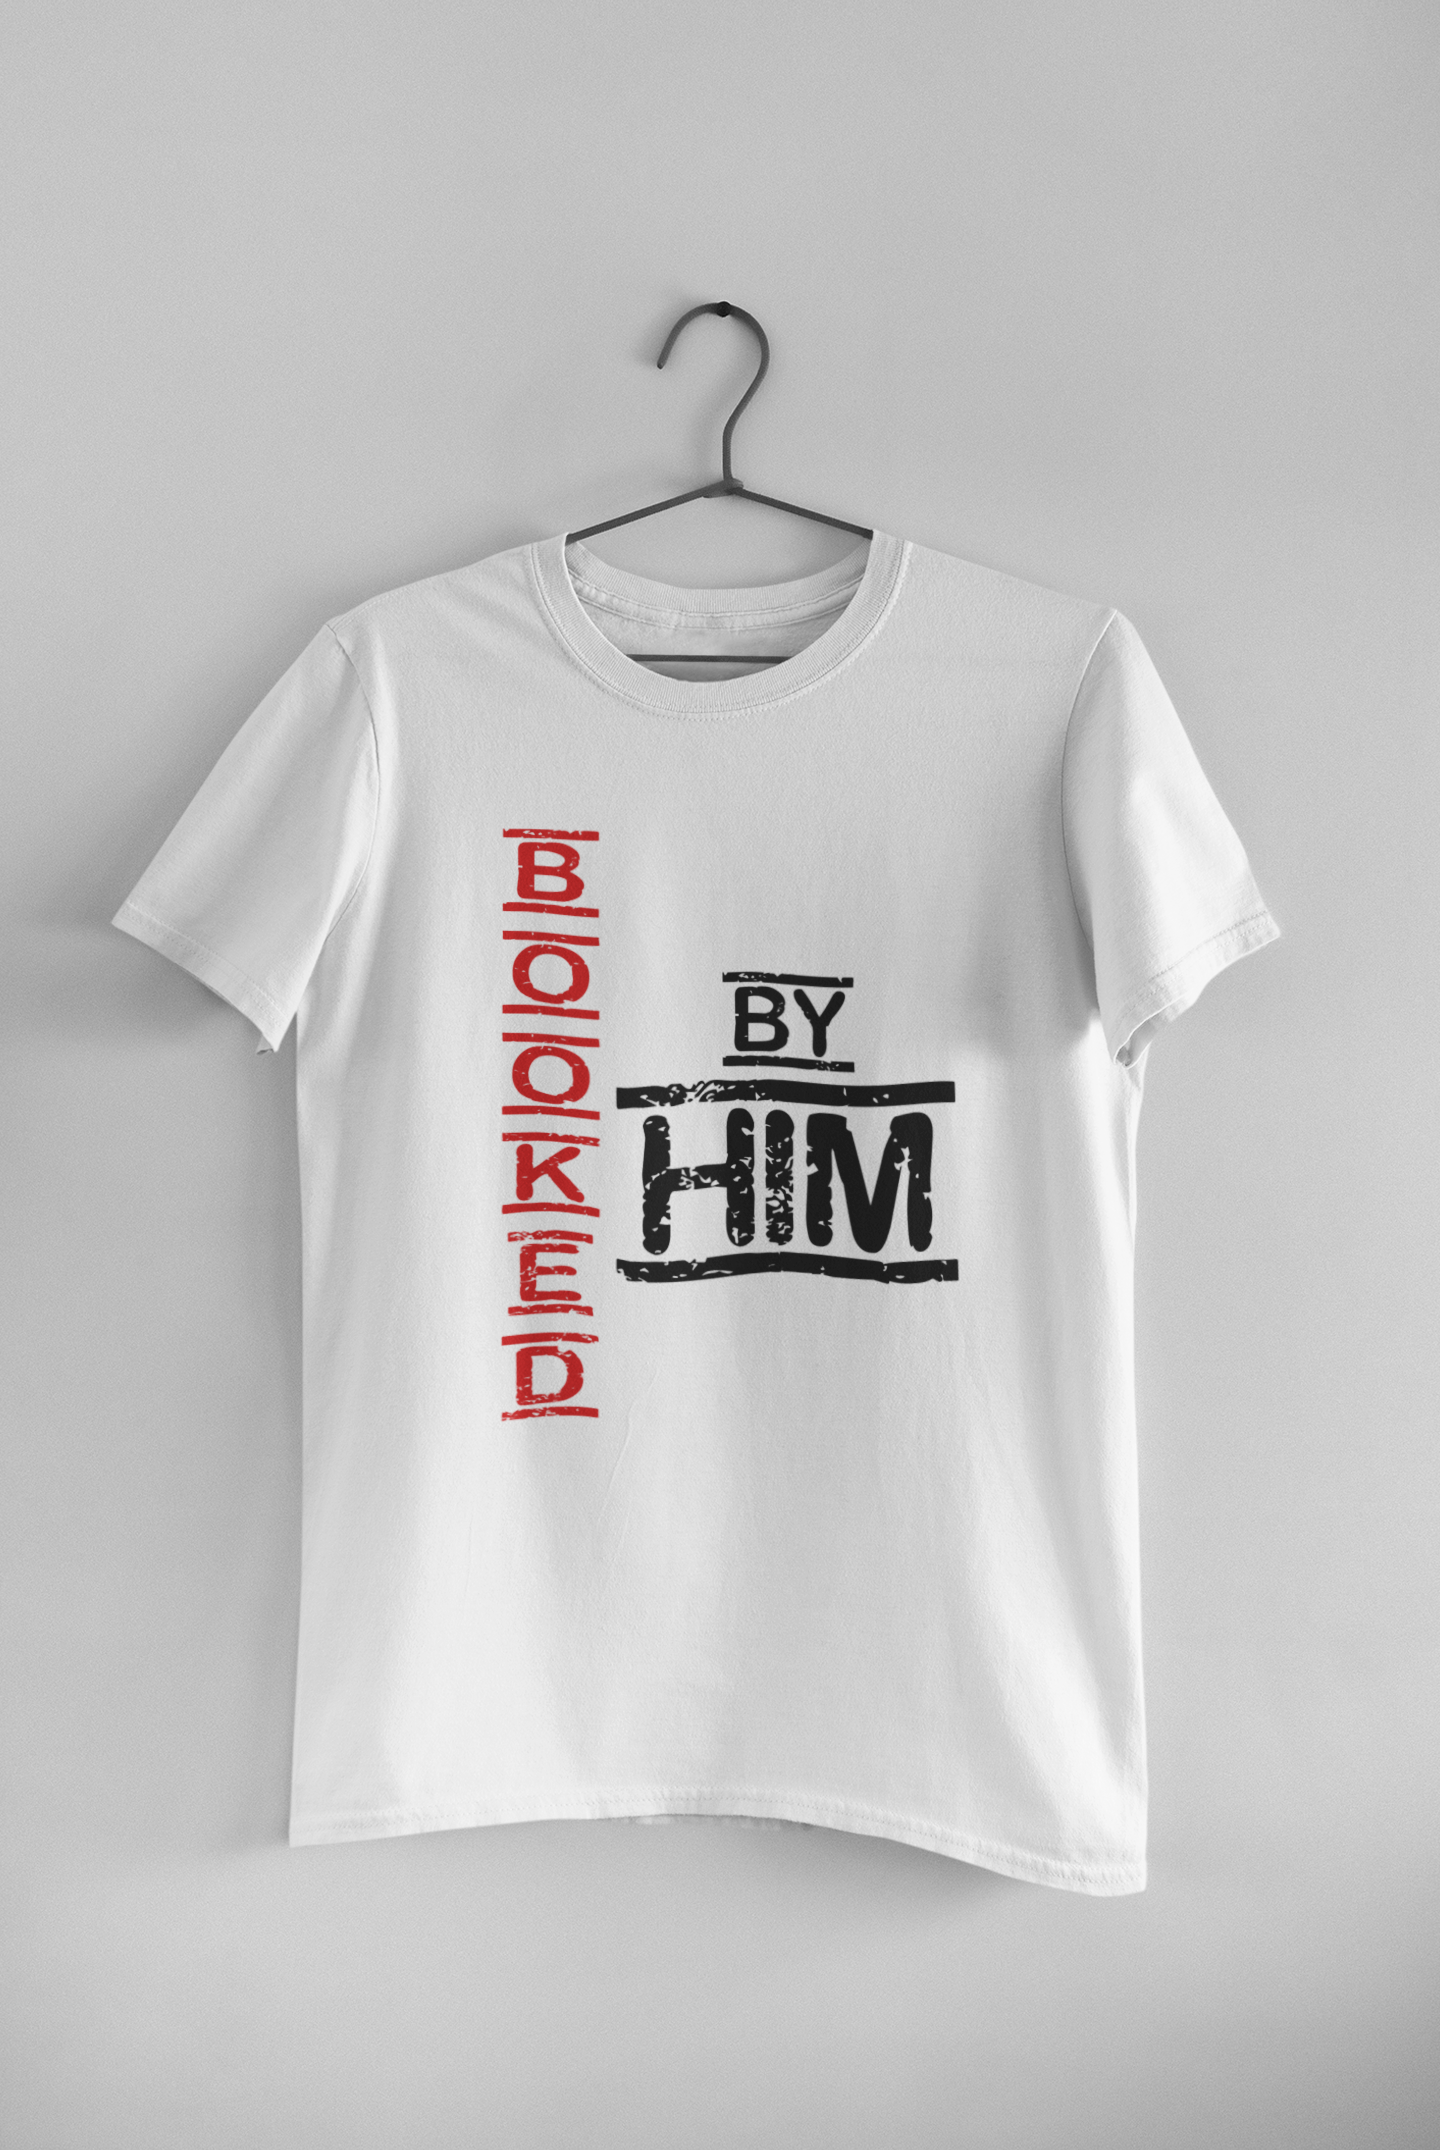 Booked By Him Her Couple Half Sleeves T-Shirts -FunkyTeesClub